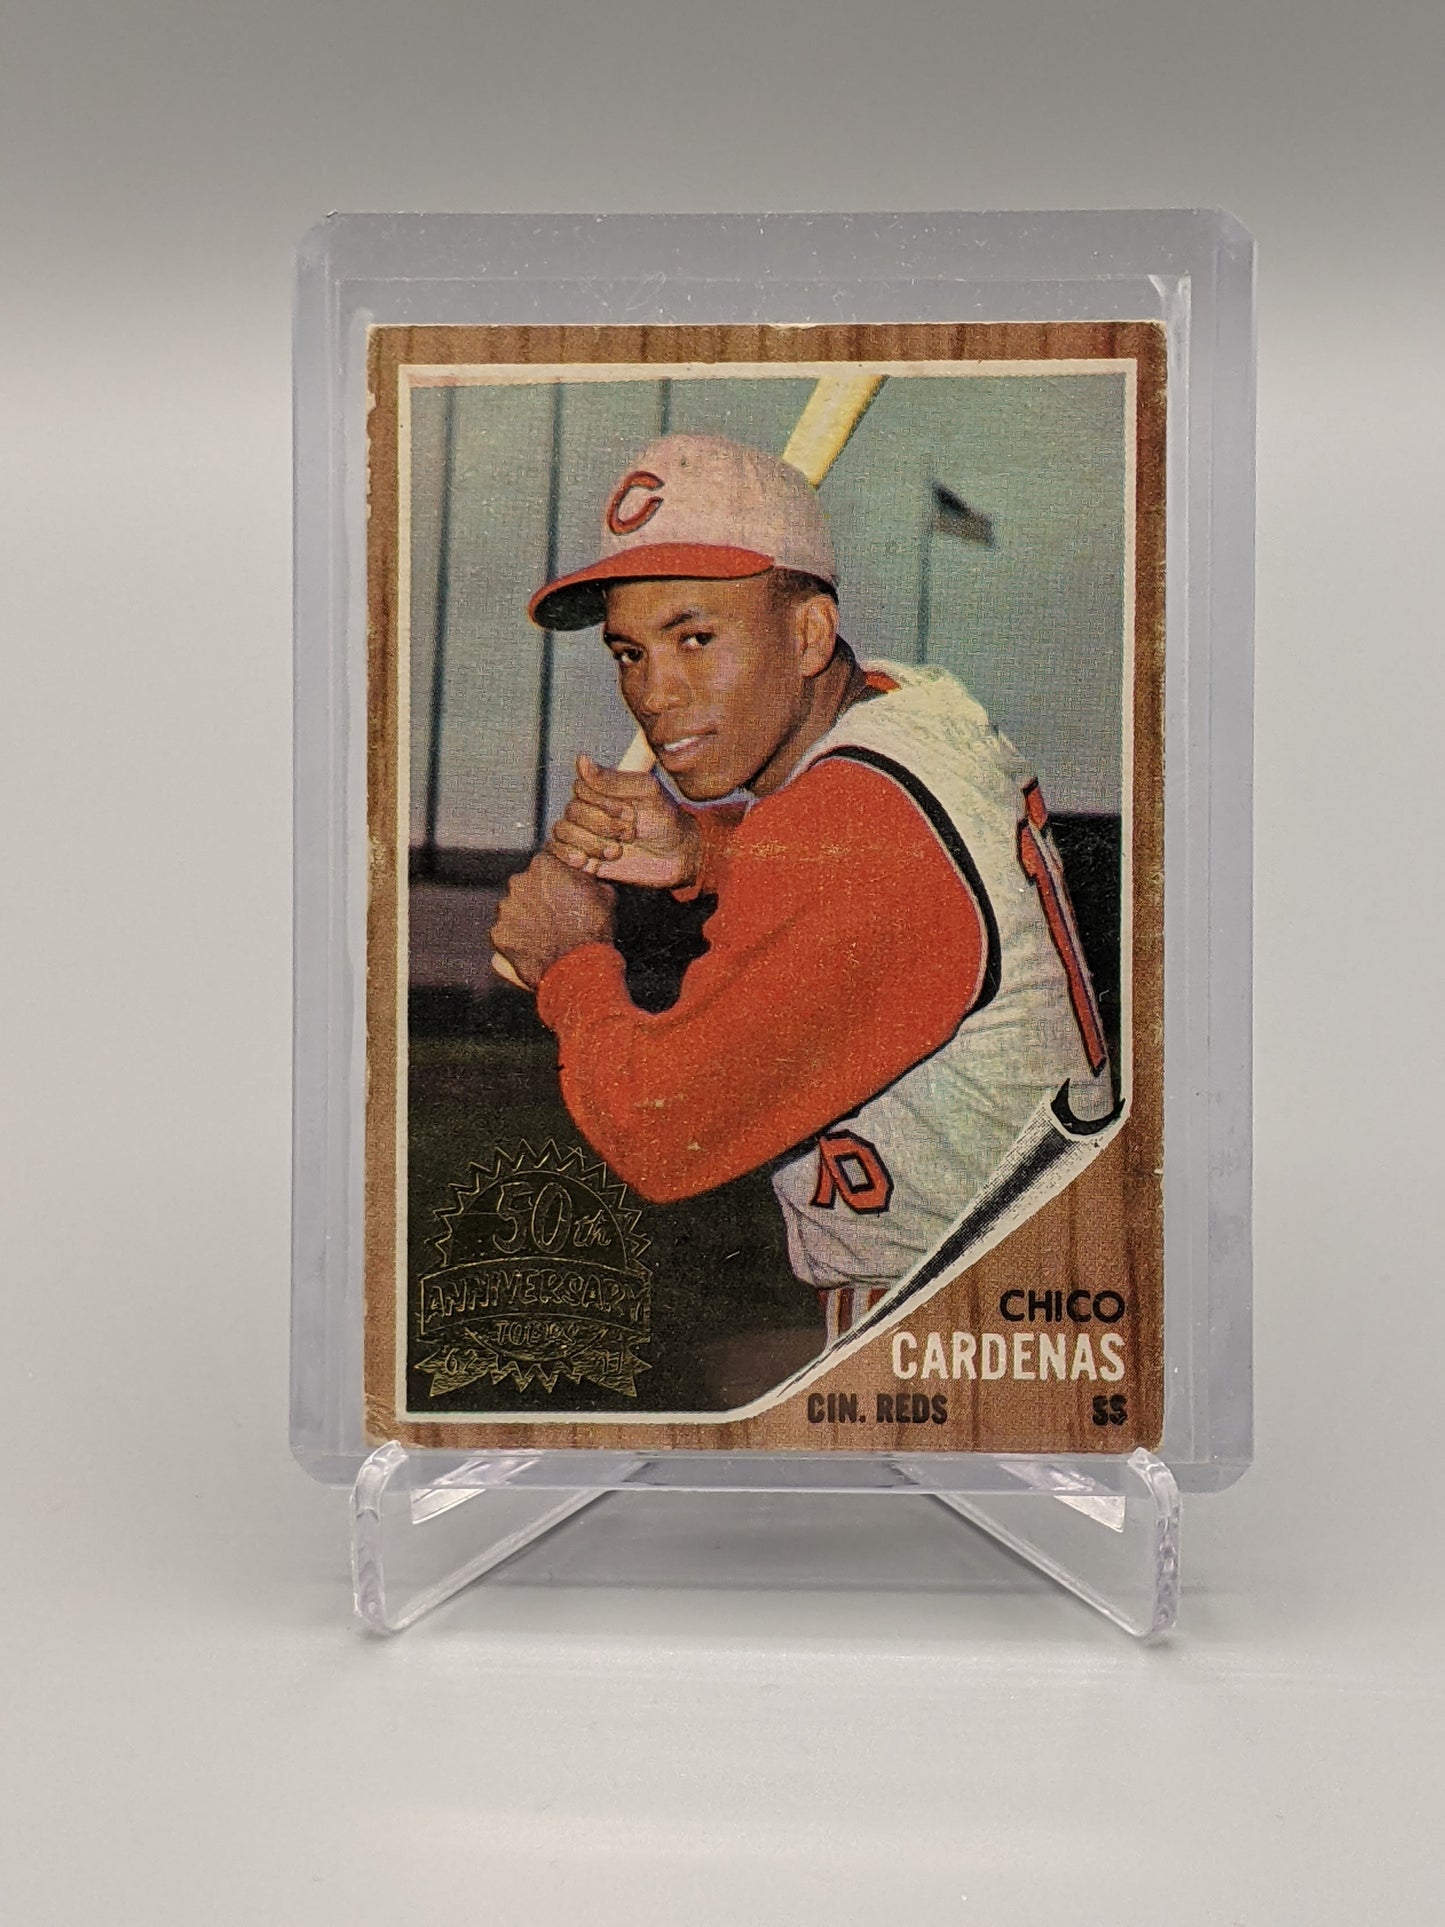 2011 Topps Heritage 50th 1962 Buyback #381 Chico Cardenas